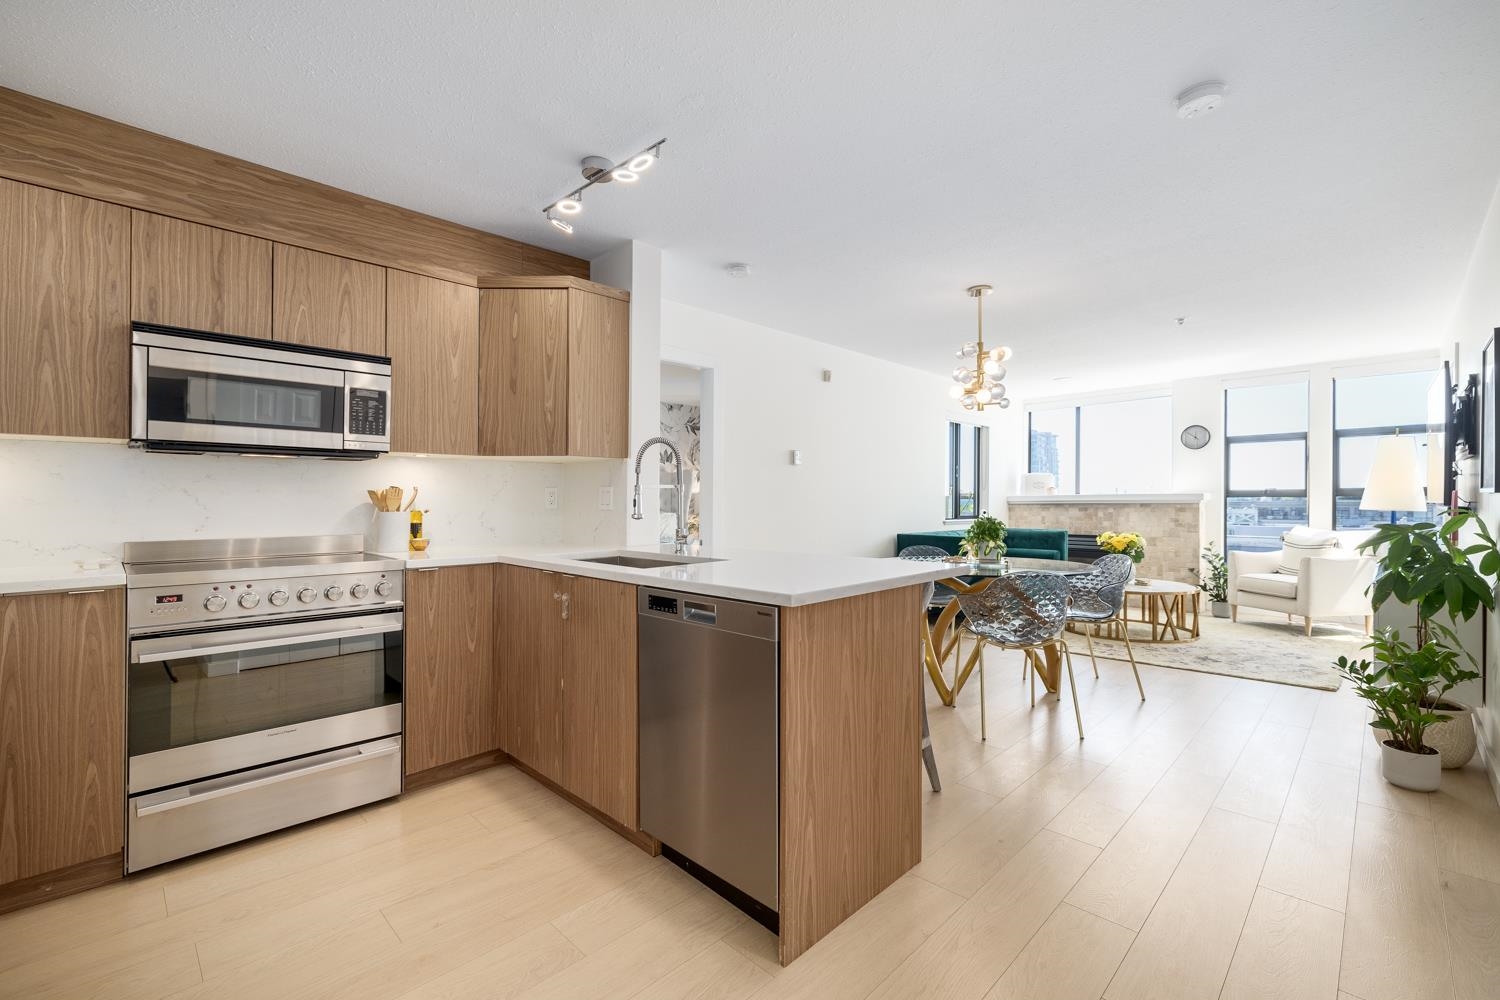 Listing image of 304 305 LONSDALE AVENUE